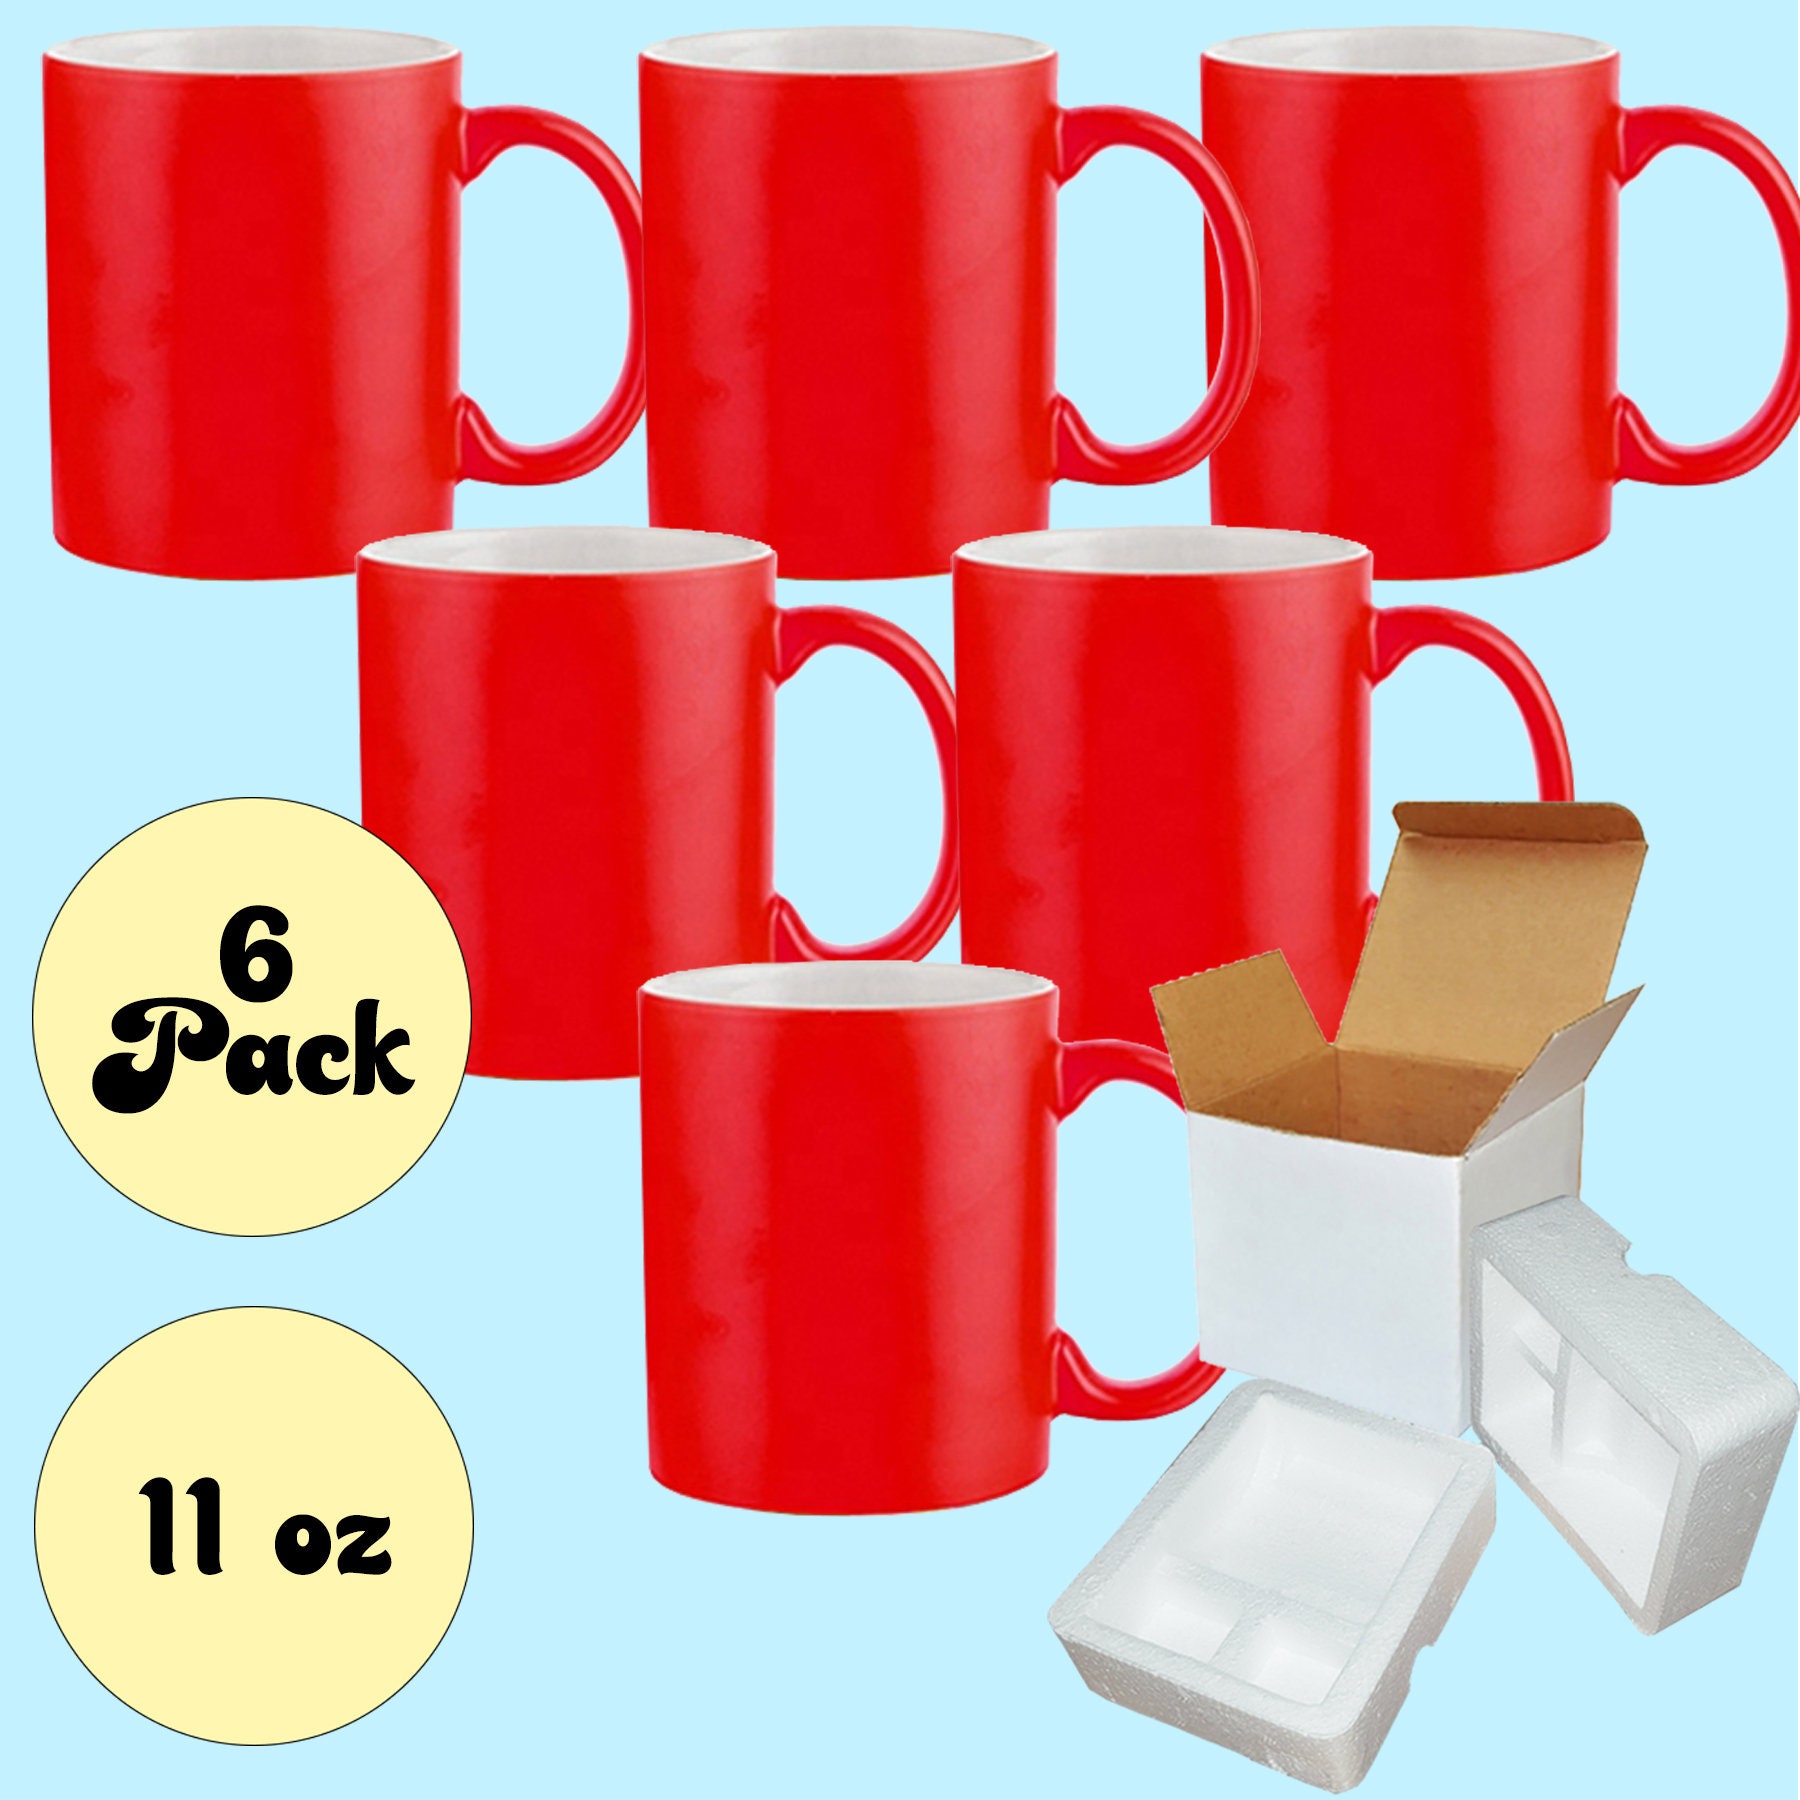 Mugsie | Sublimation Mug Bulk Pack - 12 Red Inner Magic Color Charging Mugs (15oz) - Securely Shipped with Cardboard Box and Foam Supports for Safe